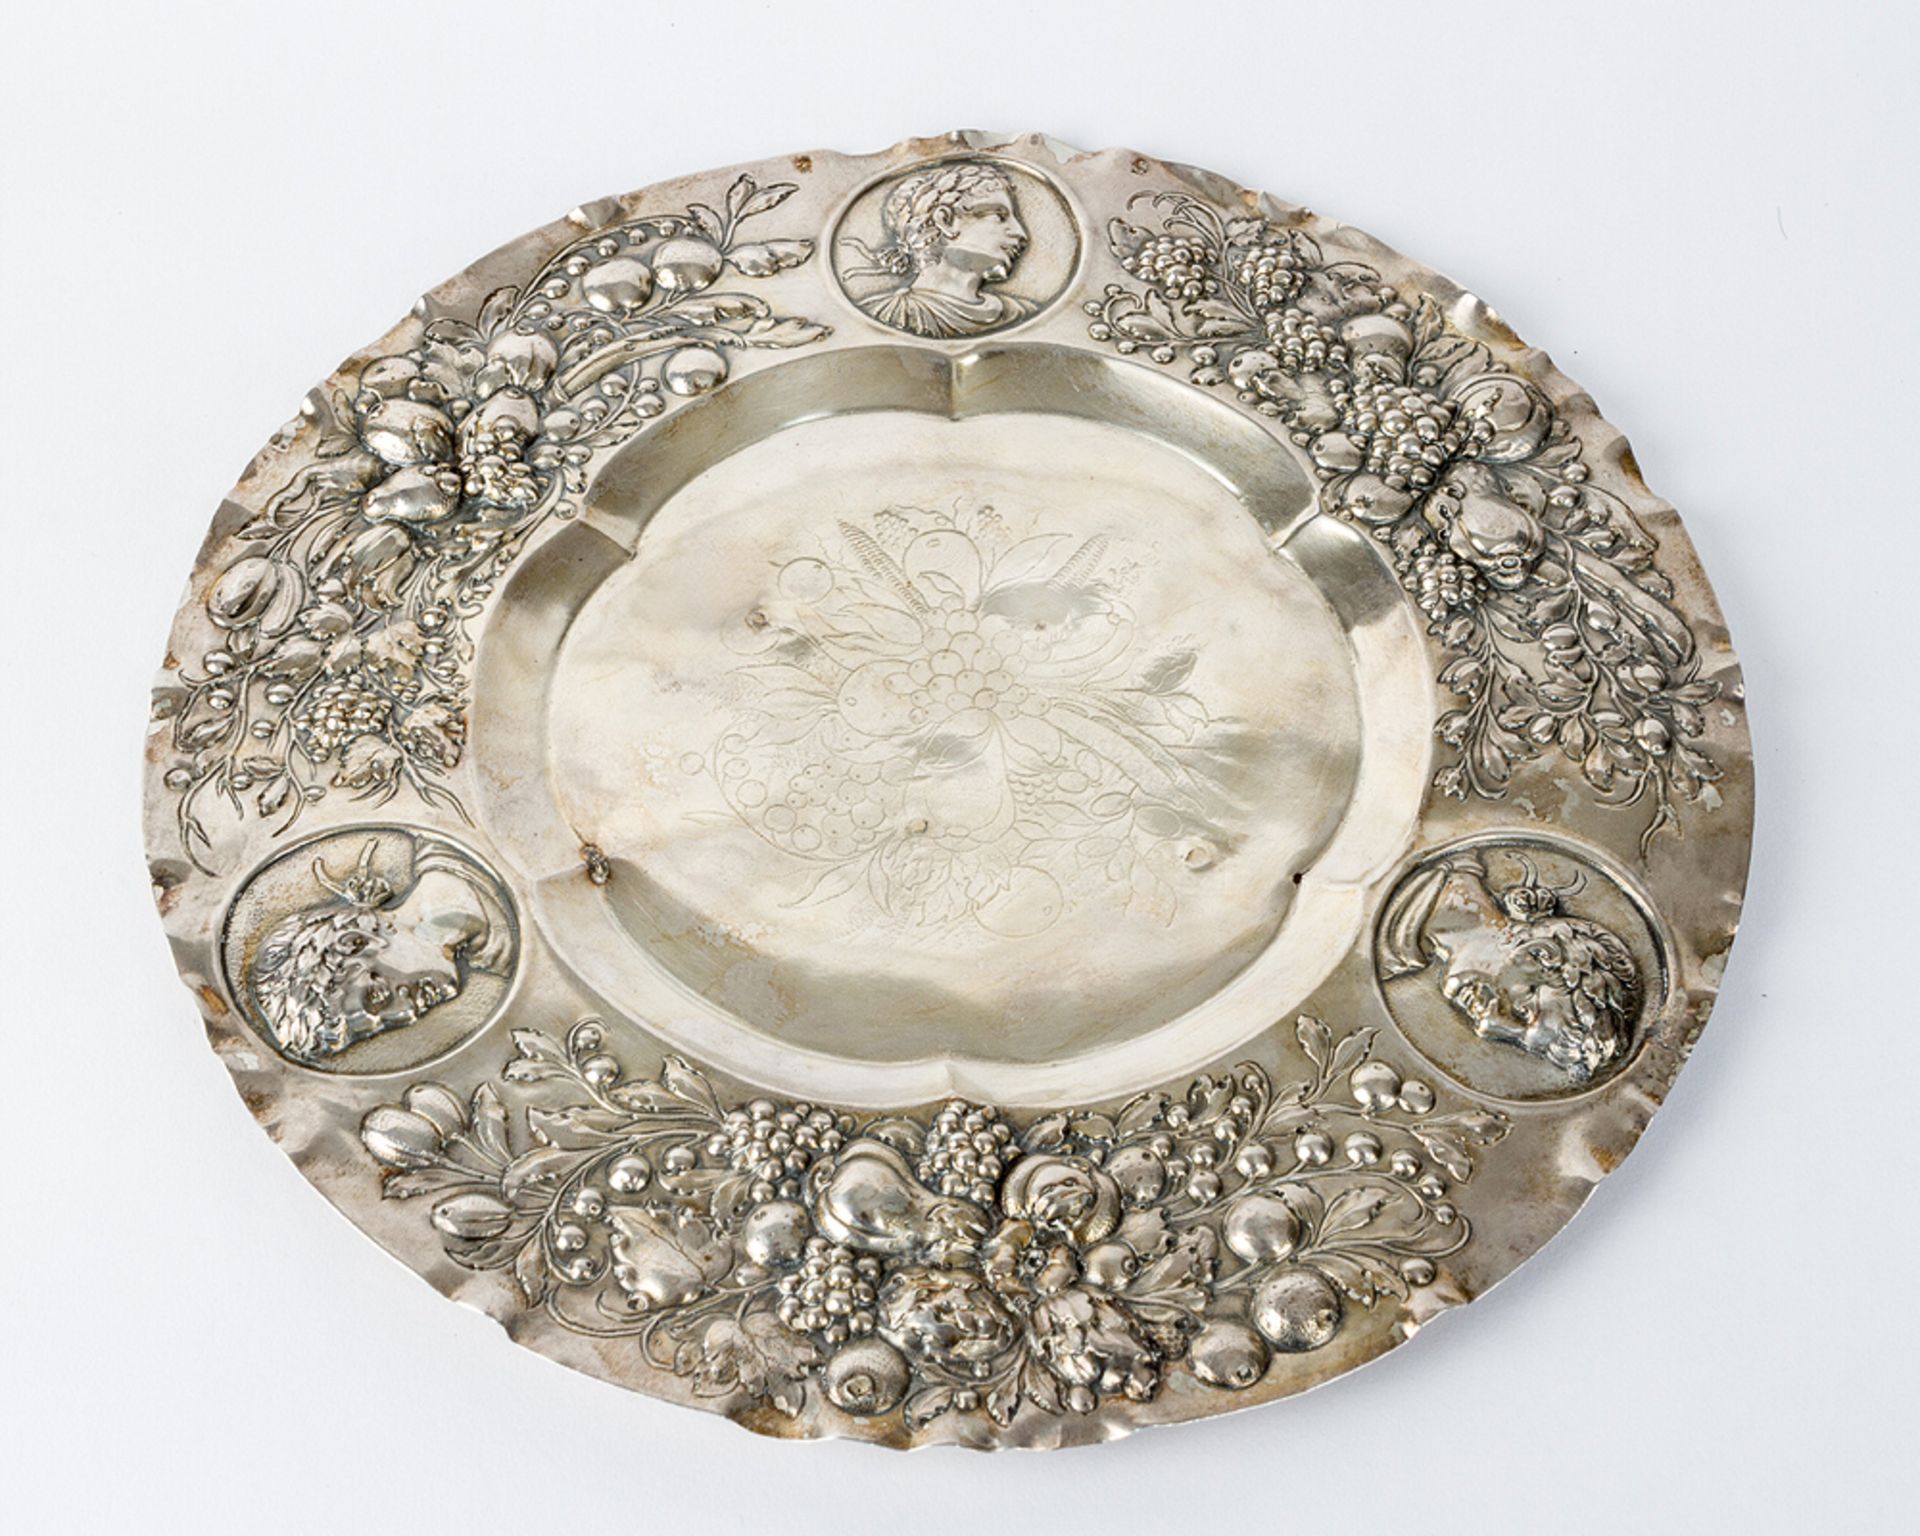 Augsburg silver plate